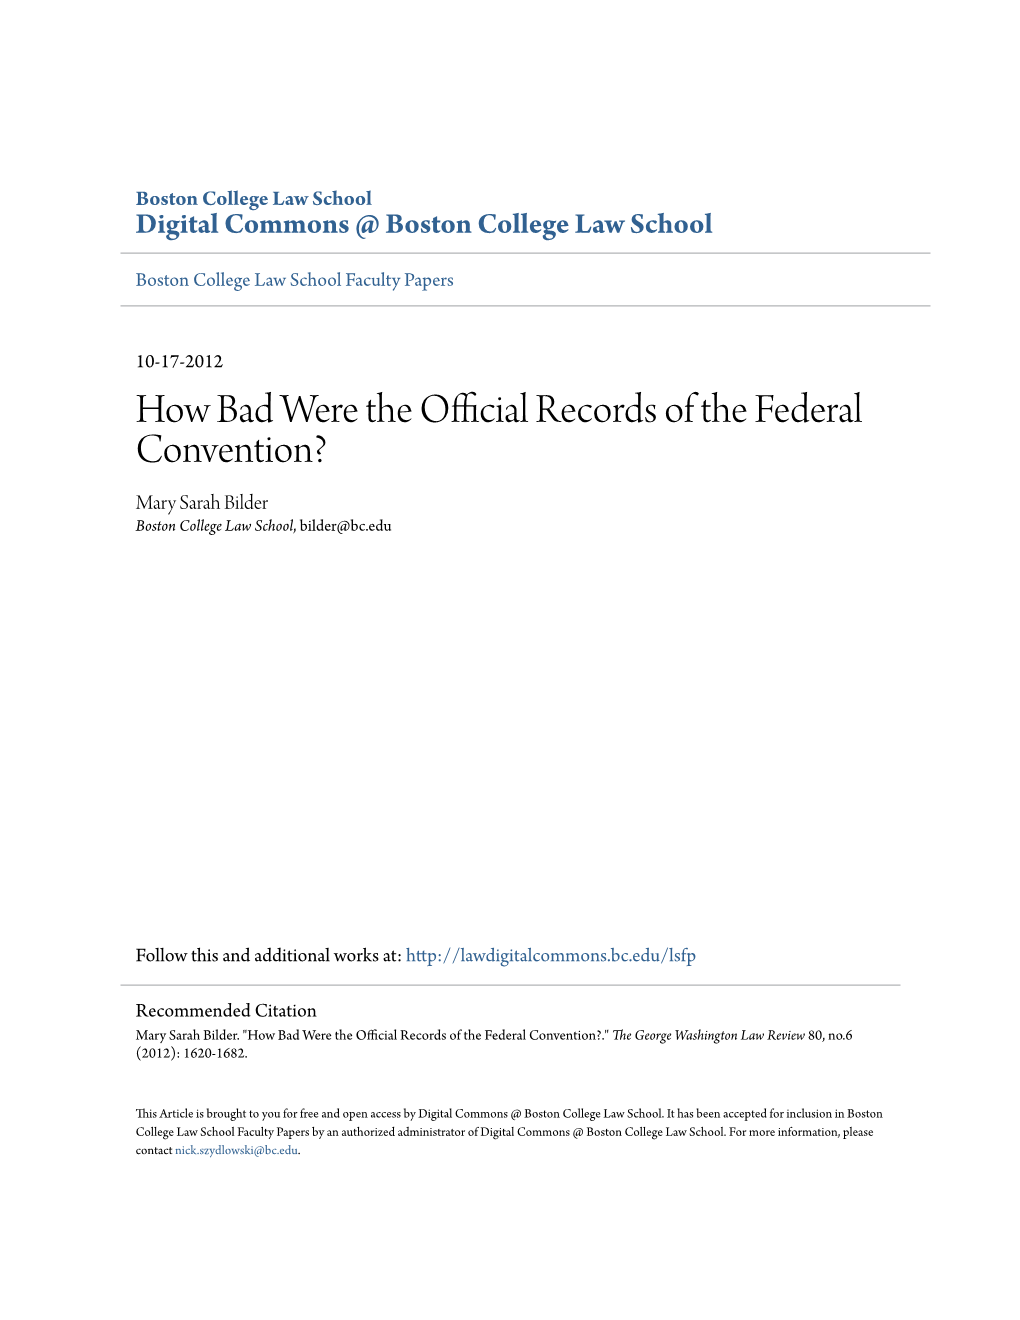 How Bad Were the Official Records of the Federal Convention? Mary Sarah Bilder Boston College Law School, Bilder@Bc.Edu